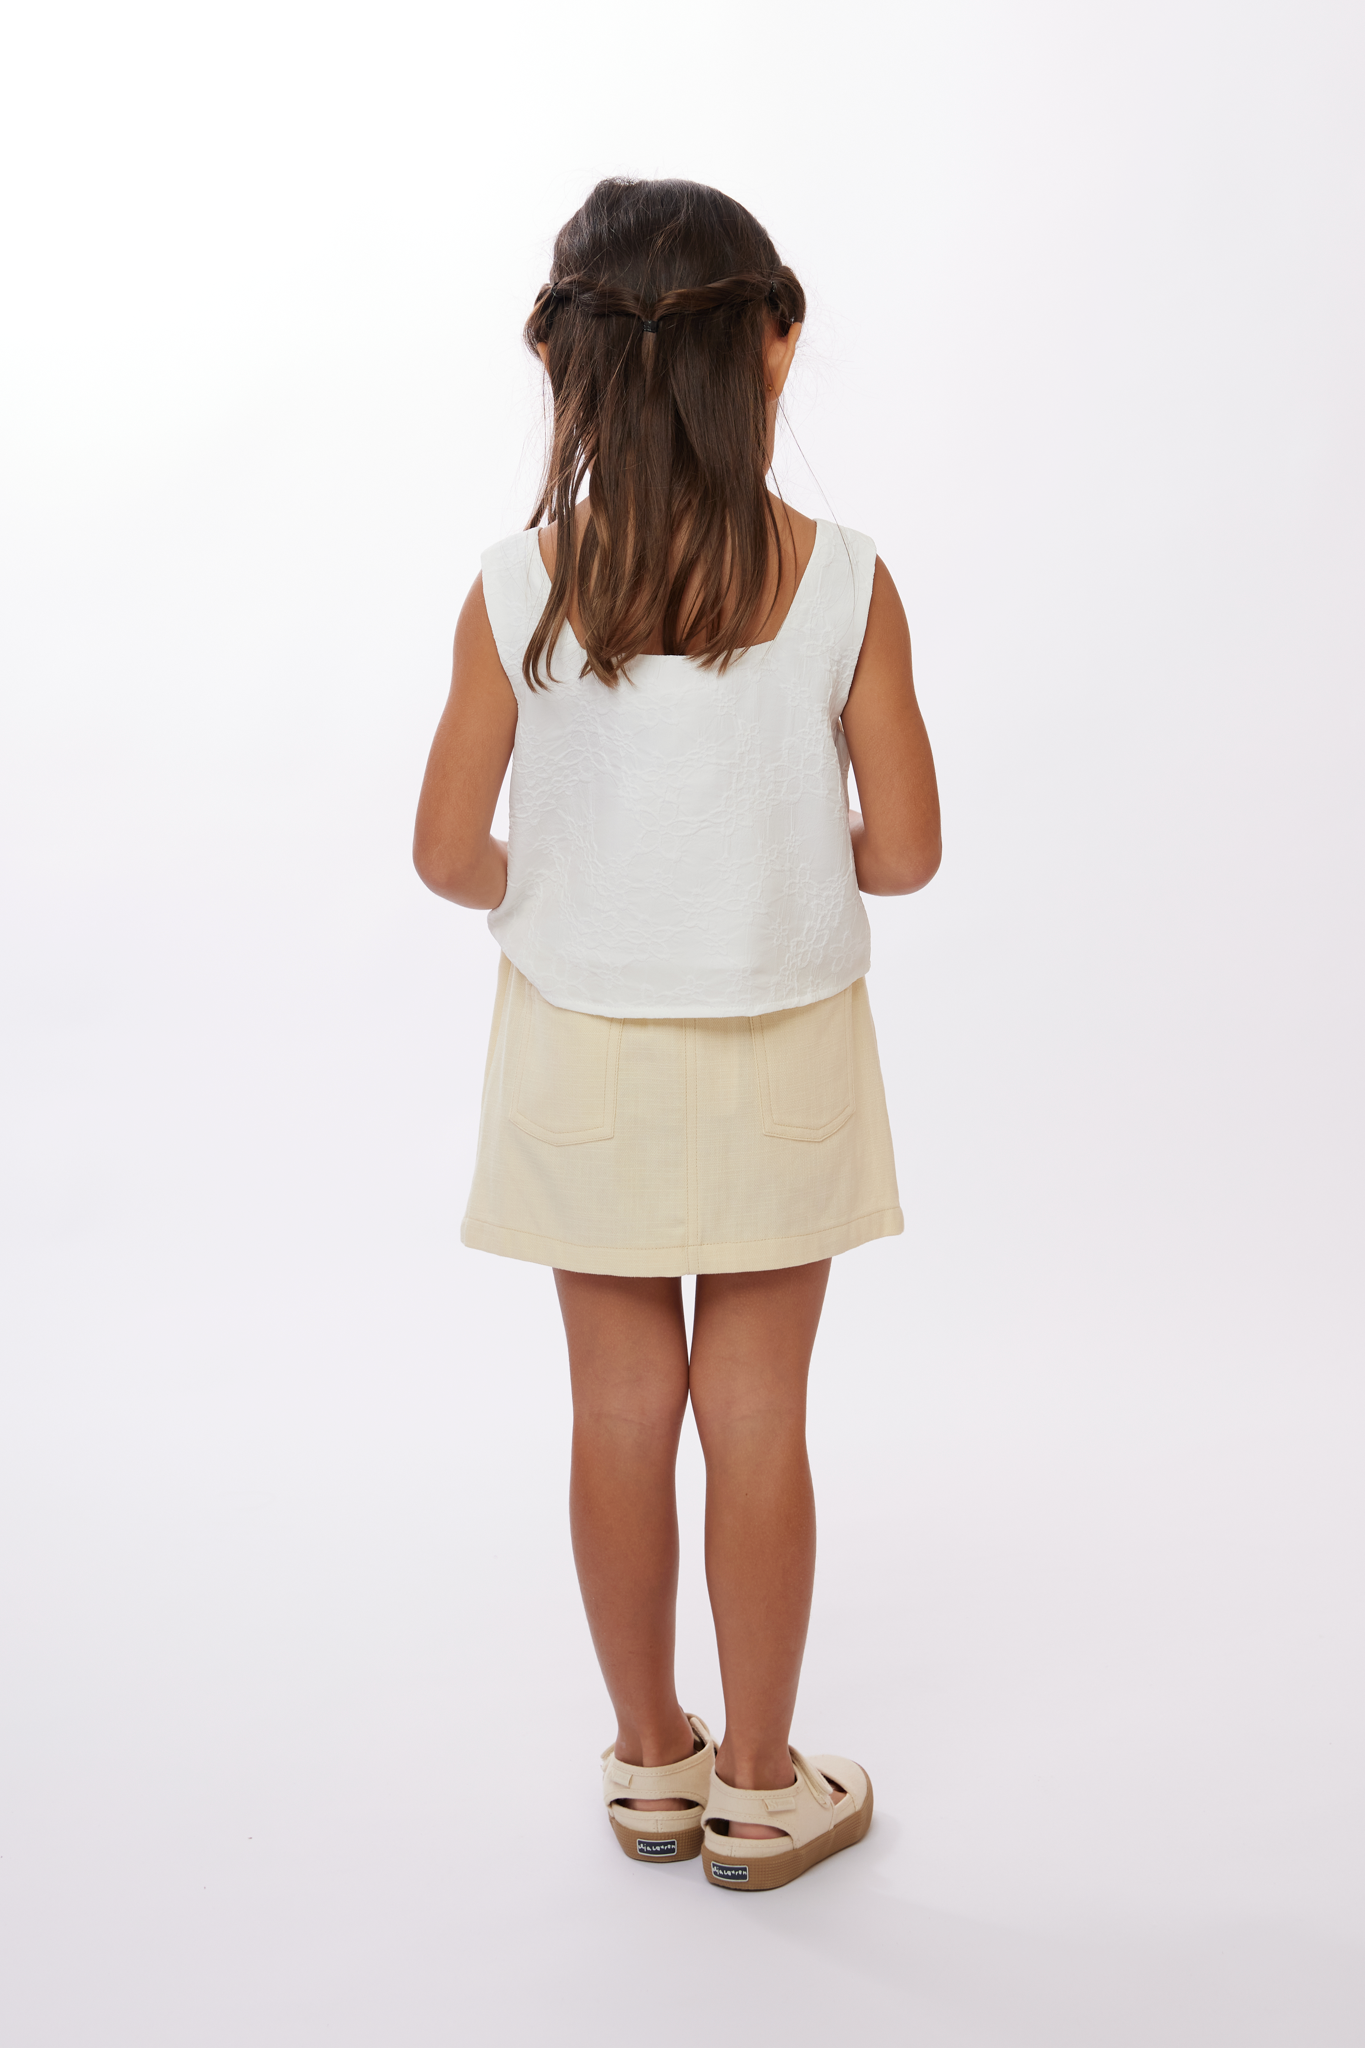 KIDS Estelle Embroidered Top in White